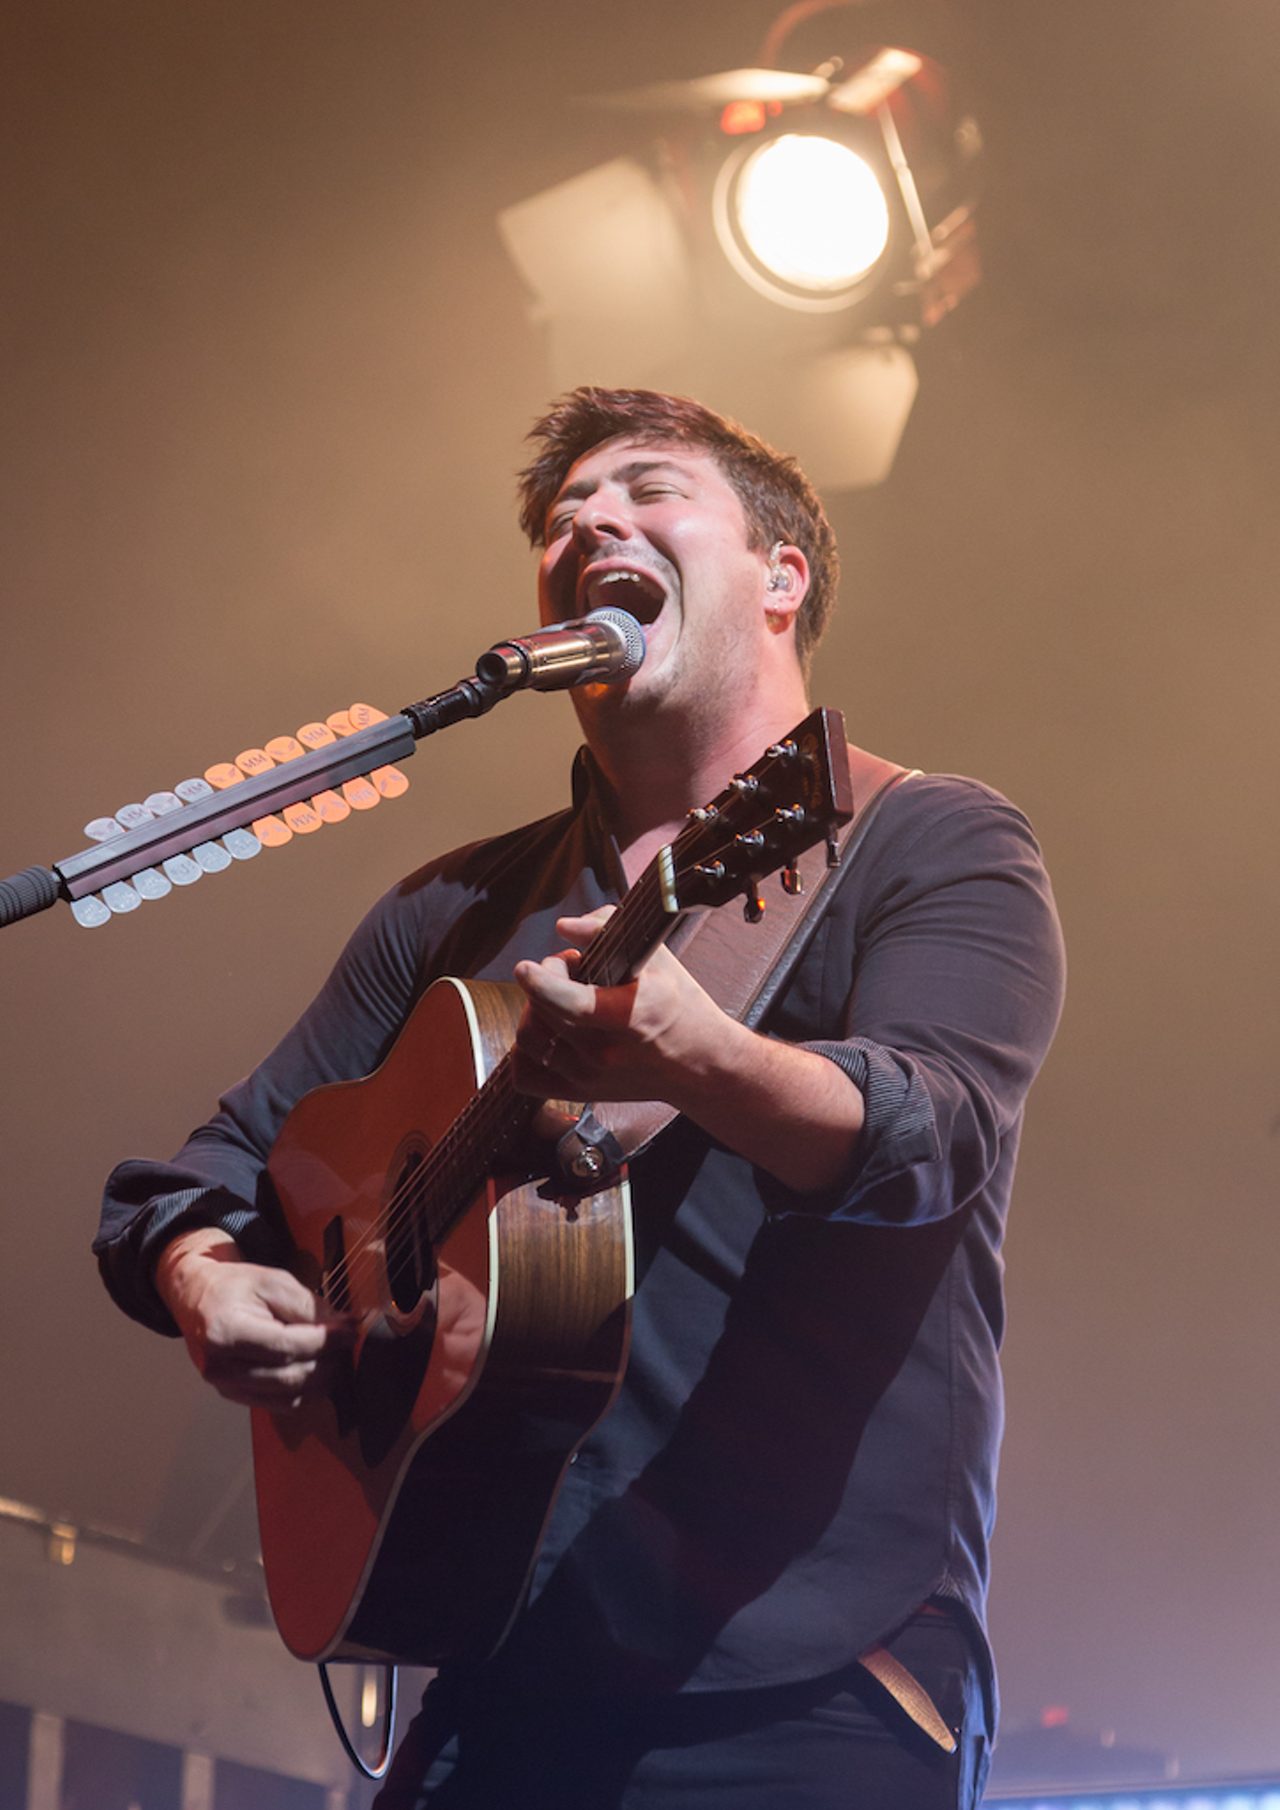 Mumford & Sons plays Amalie Arena in Tampa, Florida on September 21, 2017.